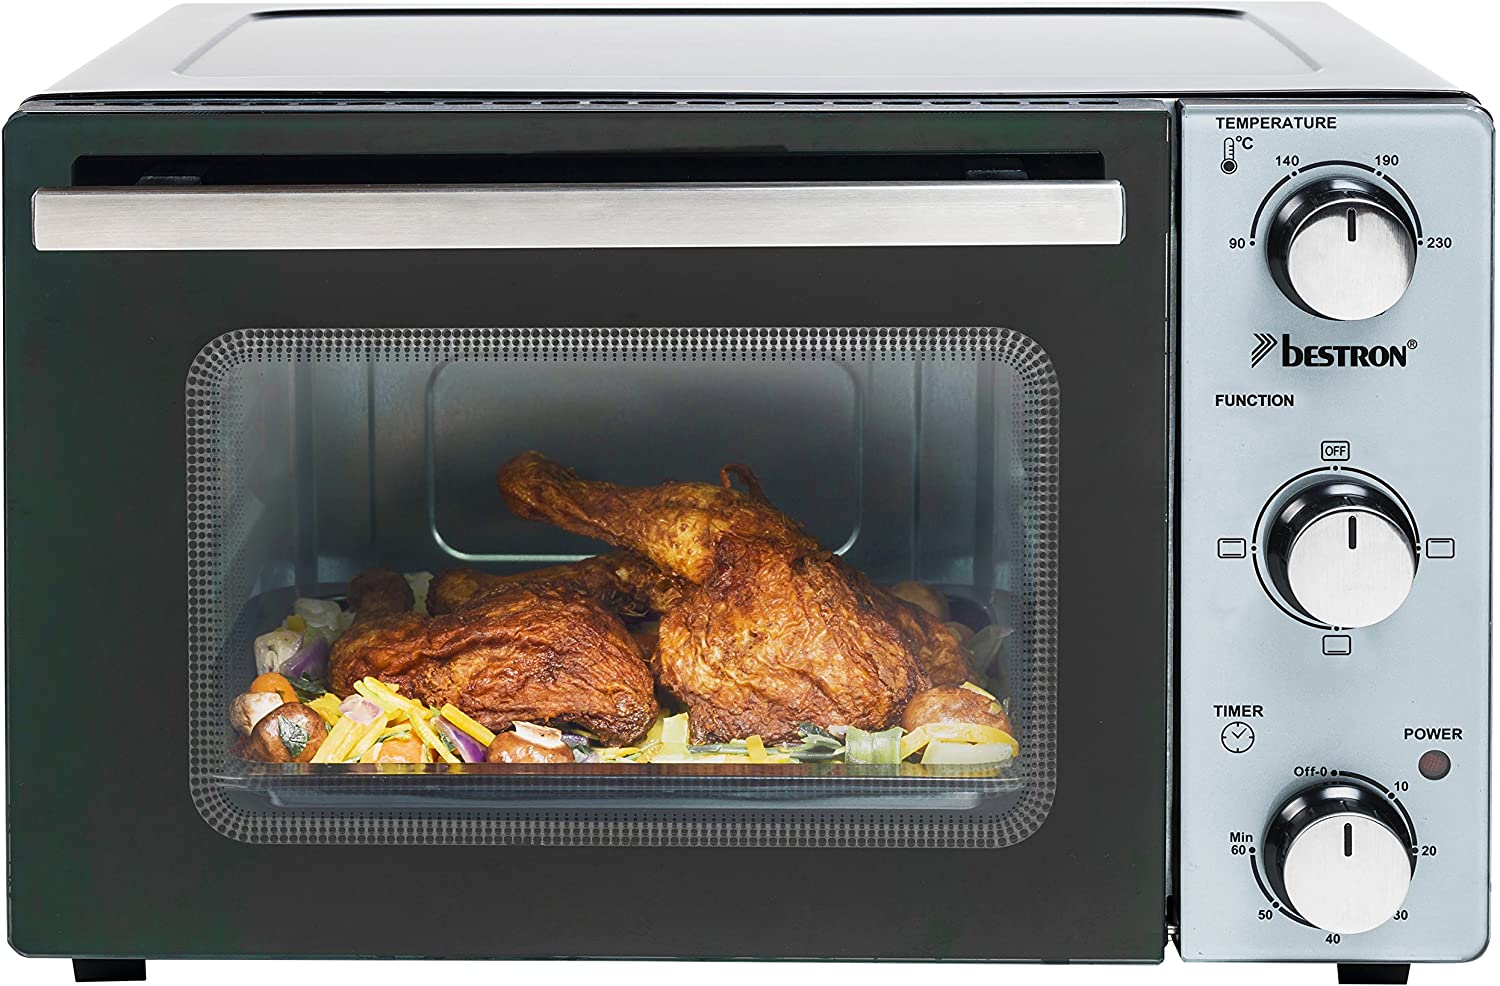 Bestron AOV20 20 Litre 1300W Compact Mini Oven with Top/Bottom Heat, Stainless Steel, Black